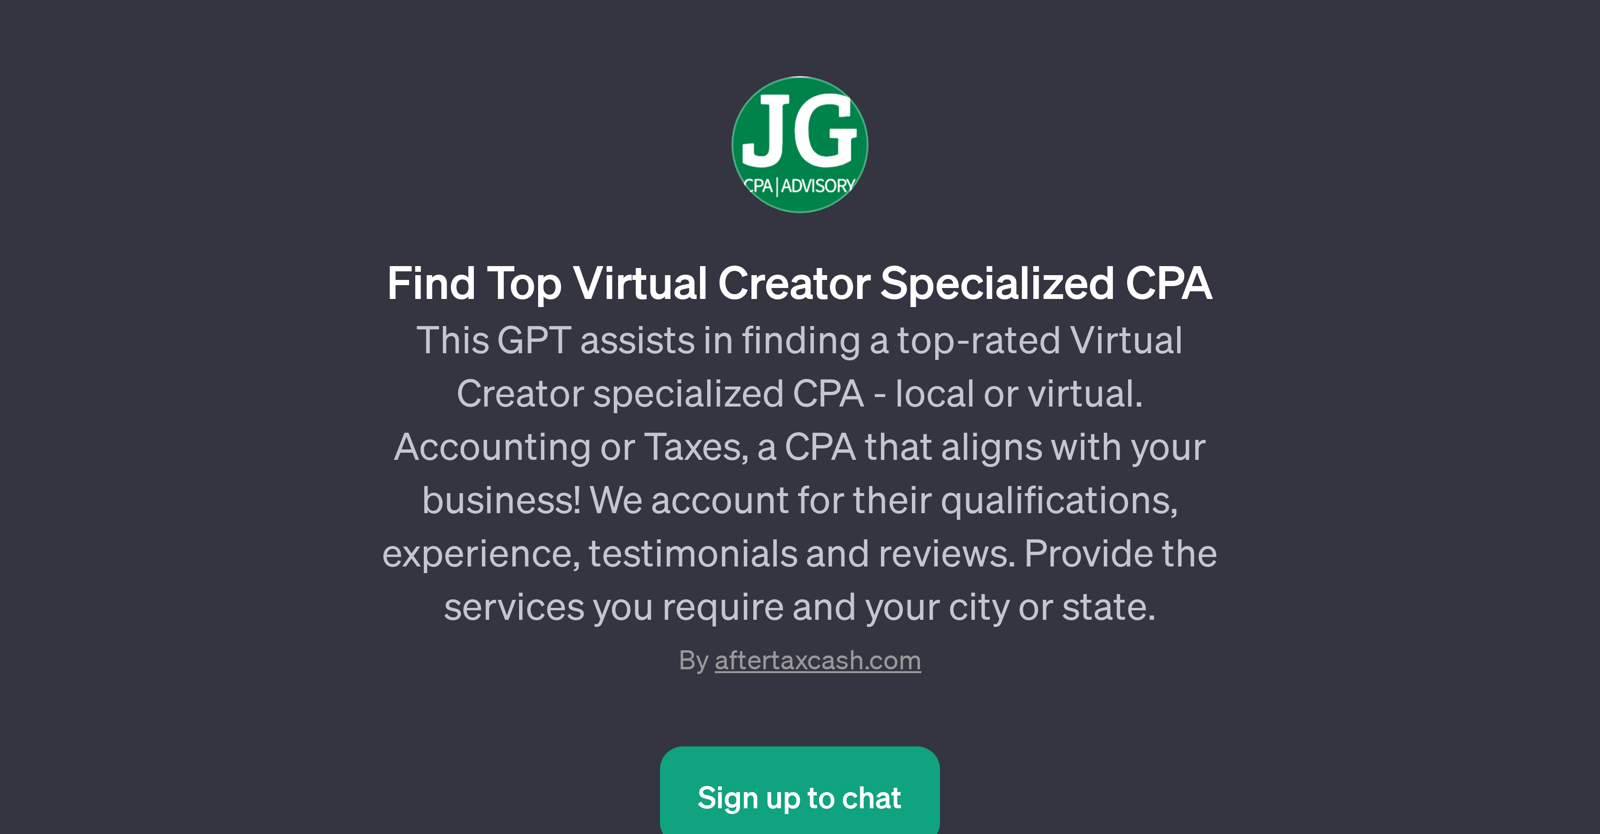 Find Top Virtual Creator Specialized CPA website